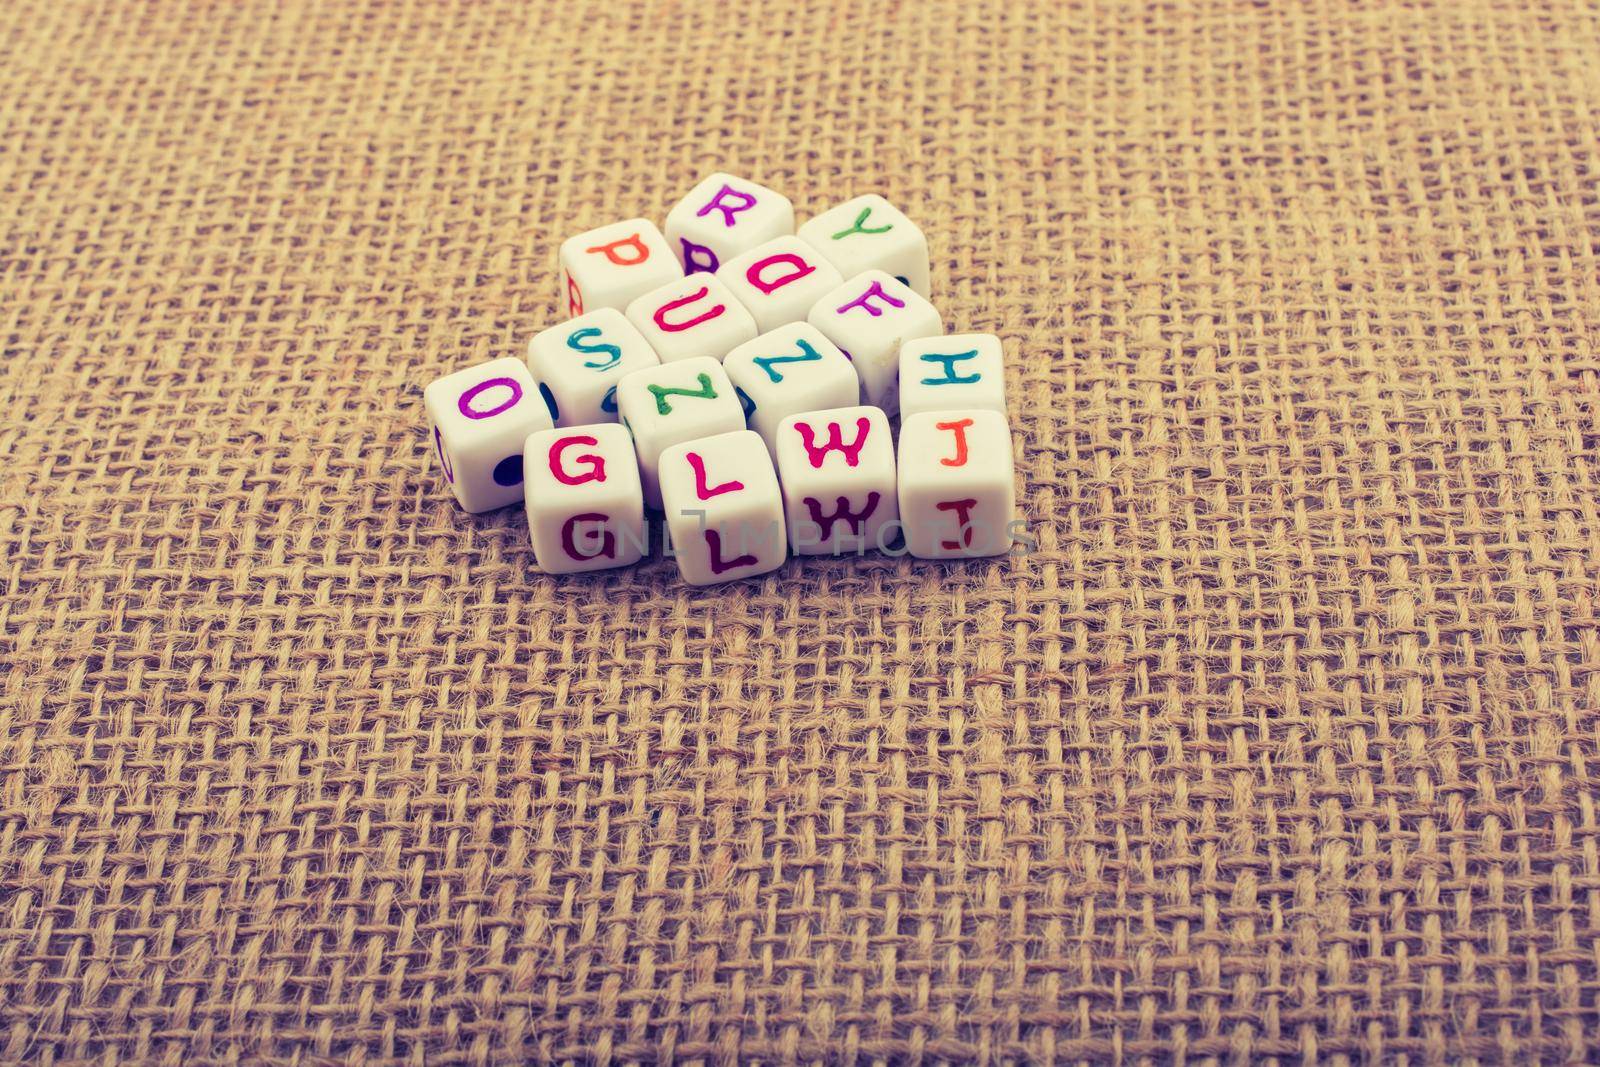 Dice-sized alphabet cubes on textured surface on display